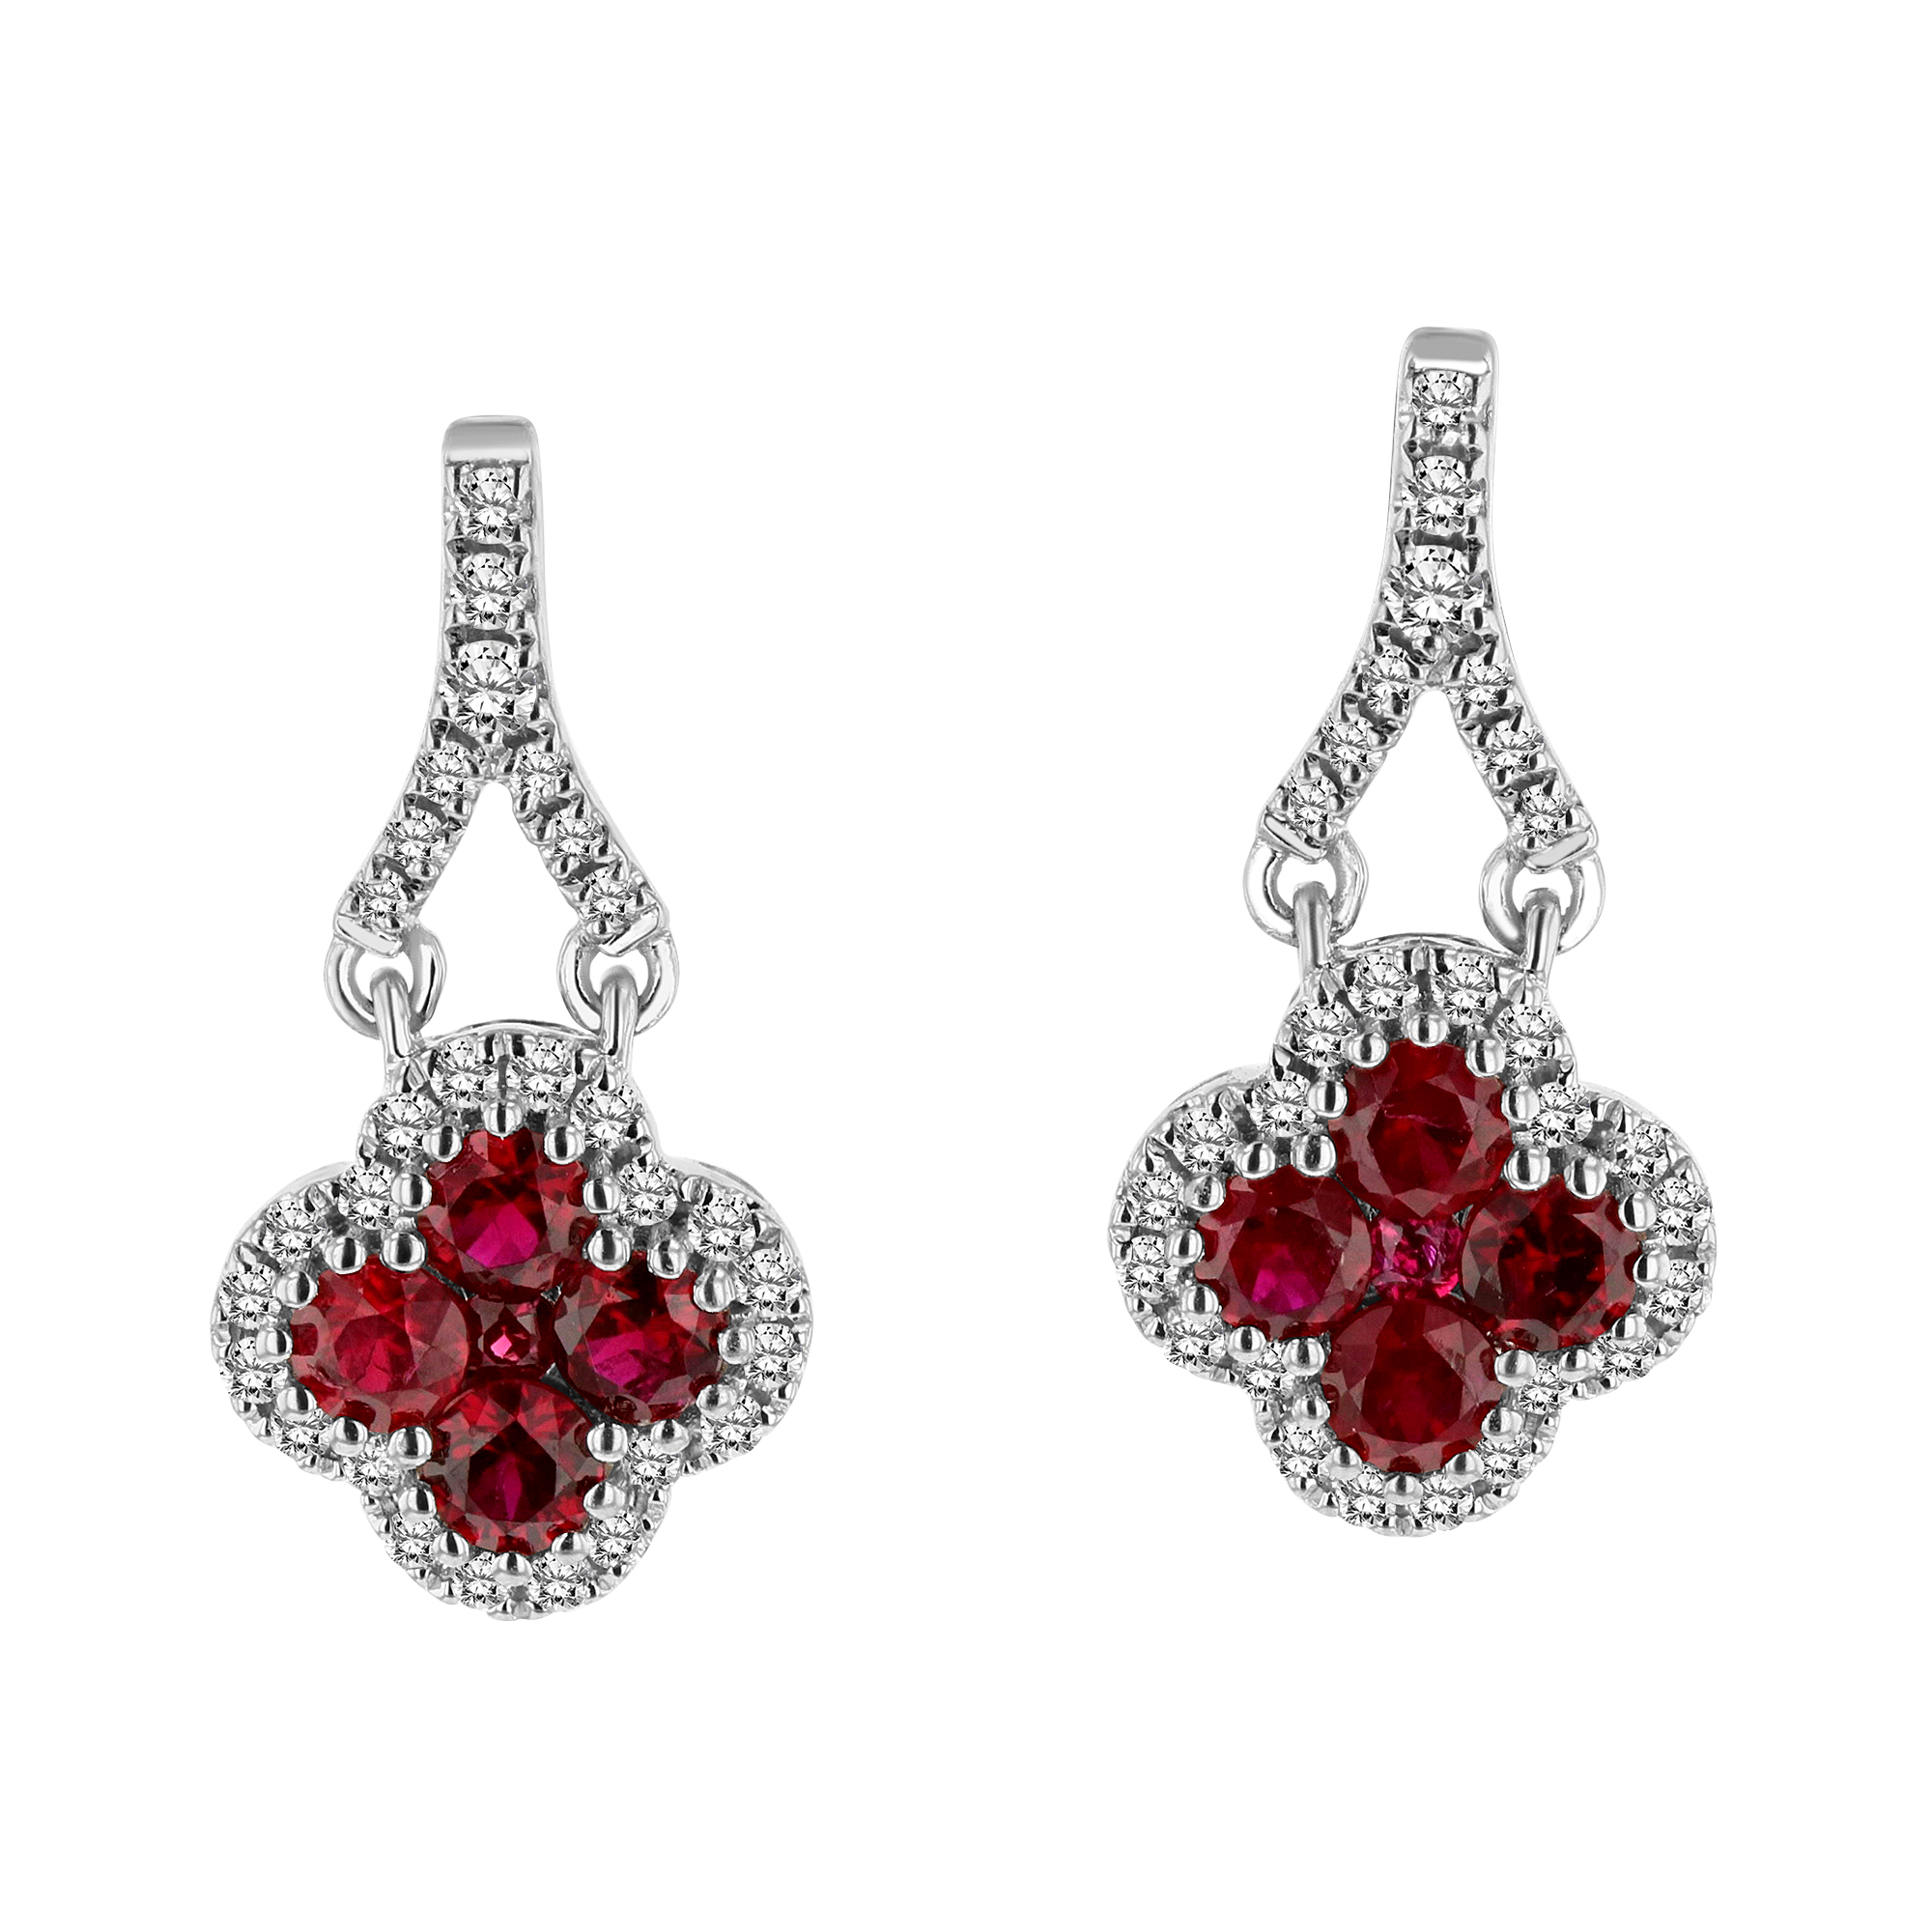 View 0.22ctw Diamond and Ruby Earrings in 18k White Gold